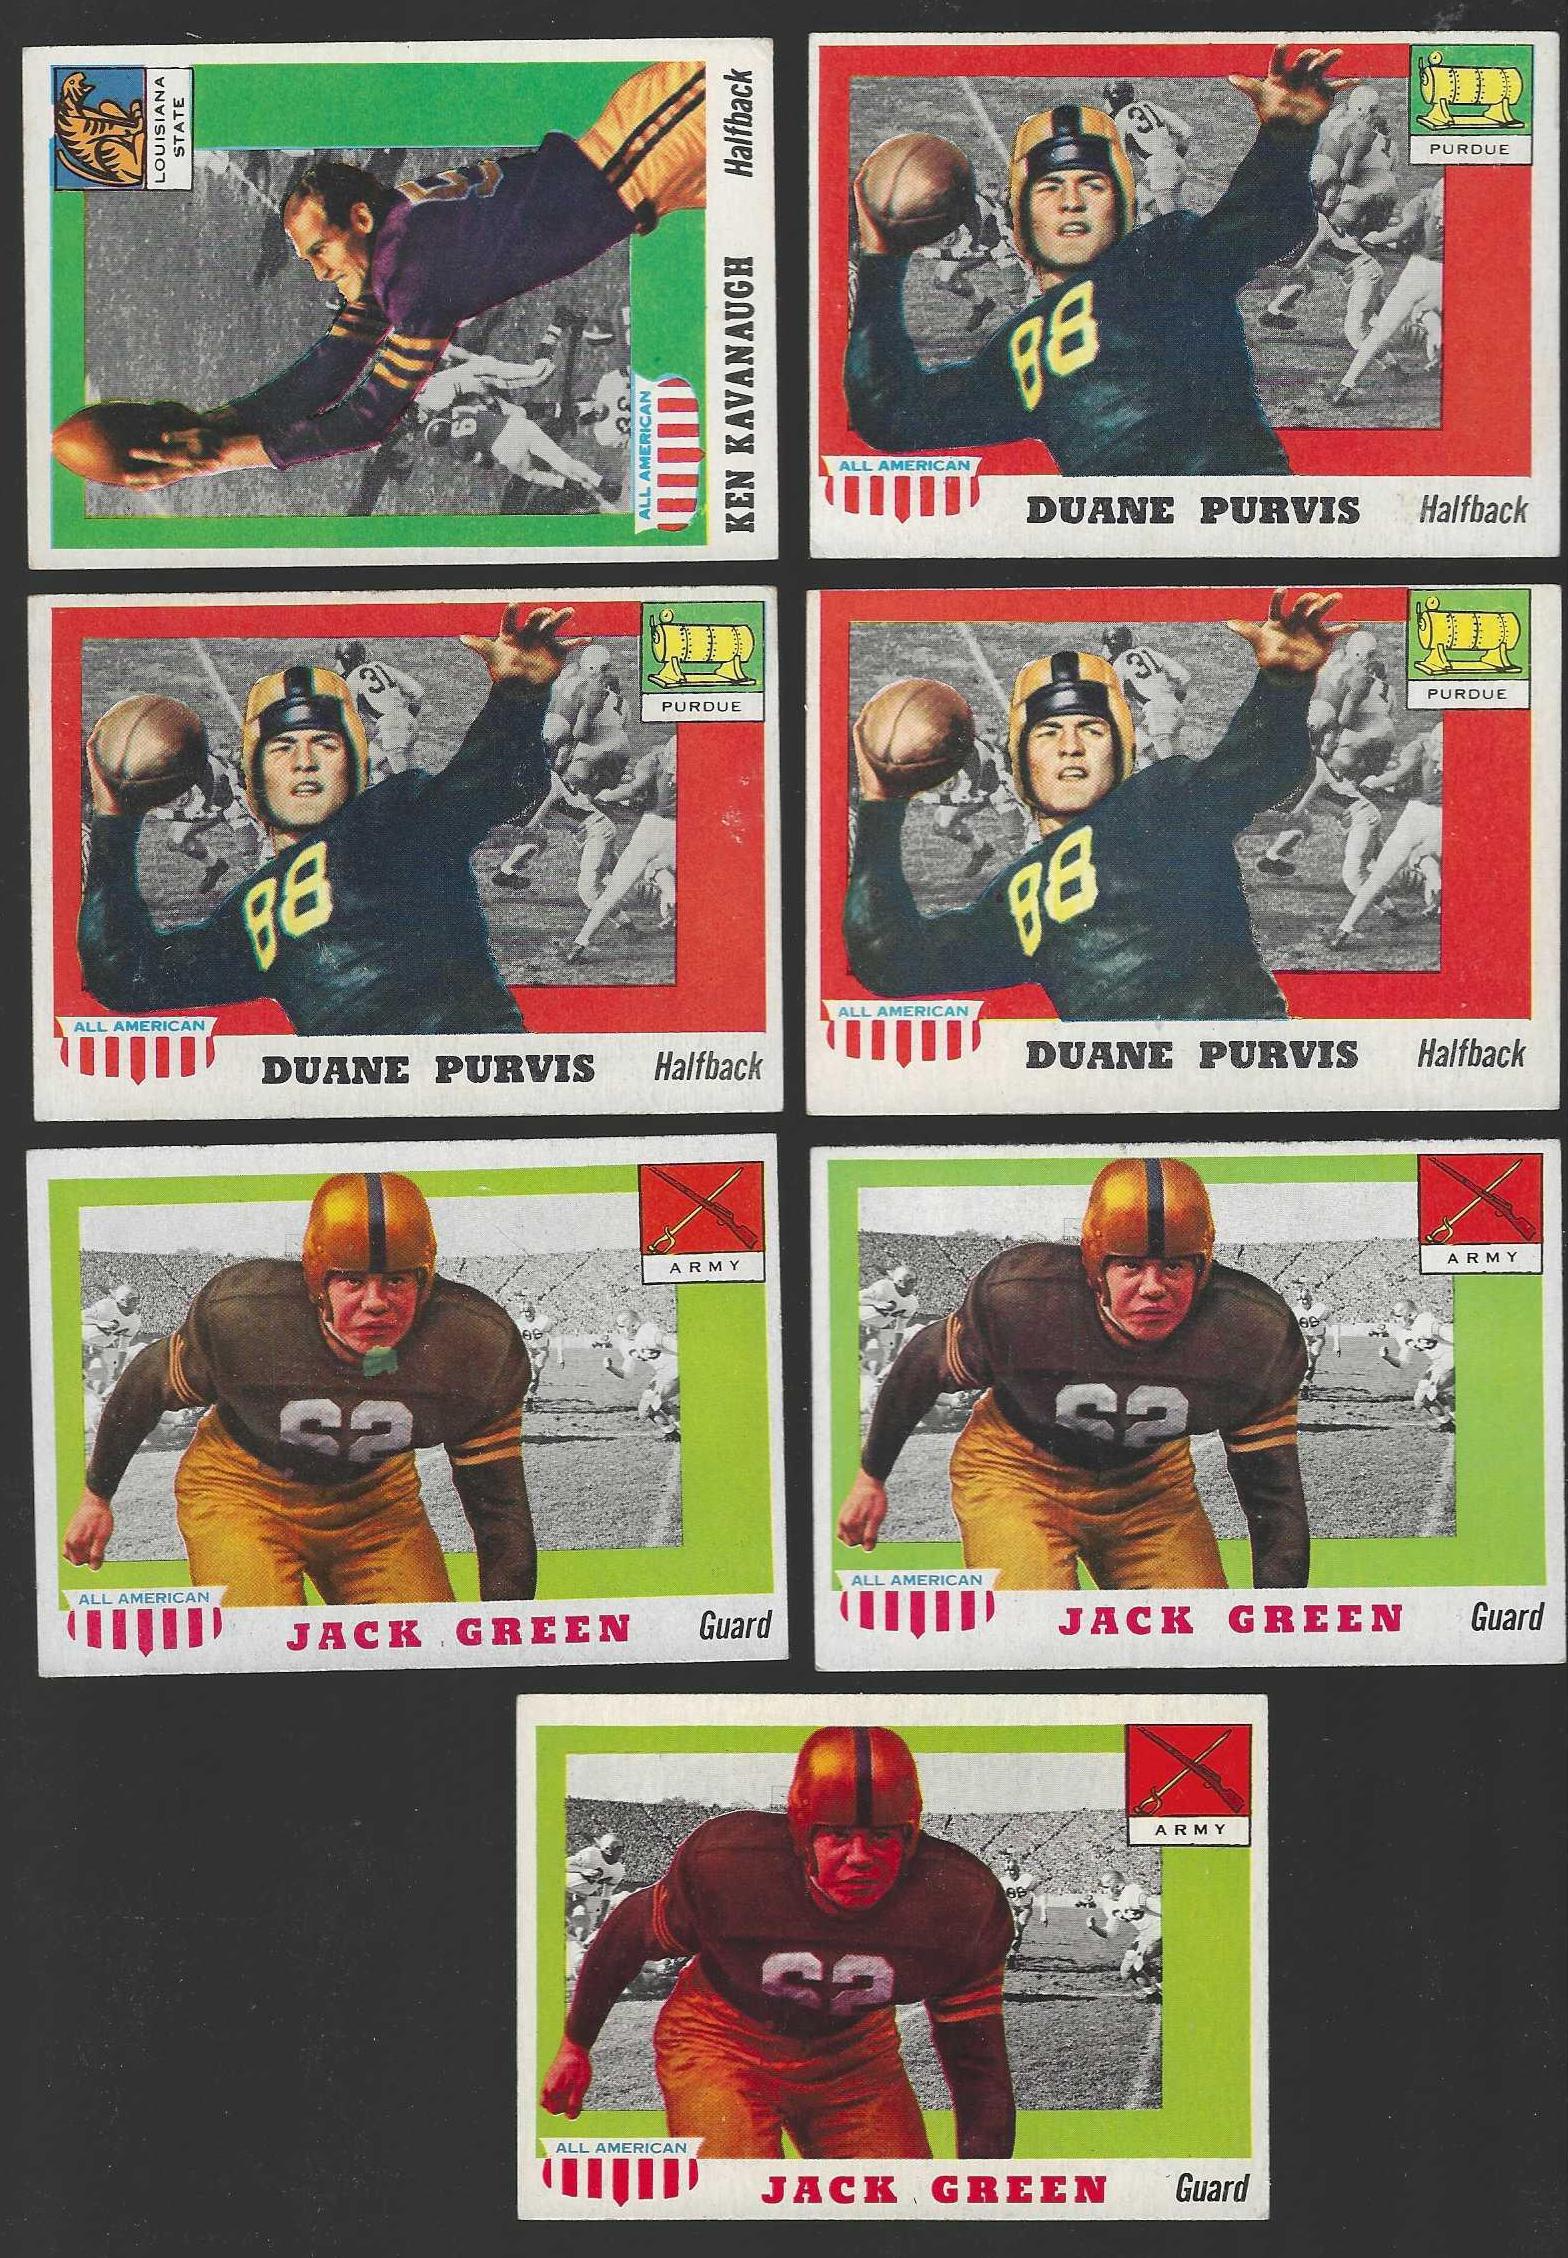 1955 Topps ALL-AMERICAN FB # 51 Duane Purvis SHORT PRINT (Purdue) Football cards value